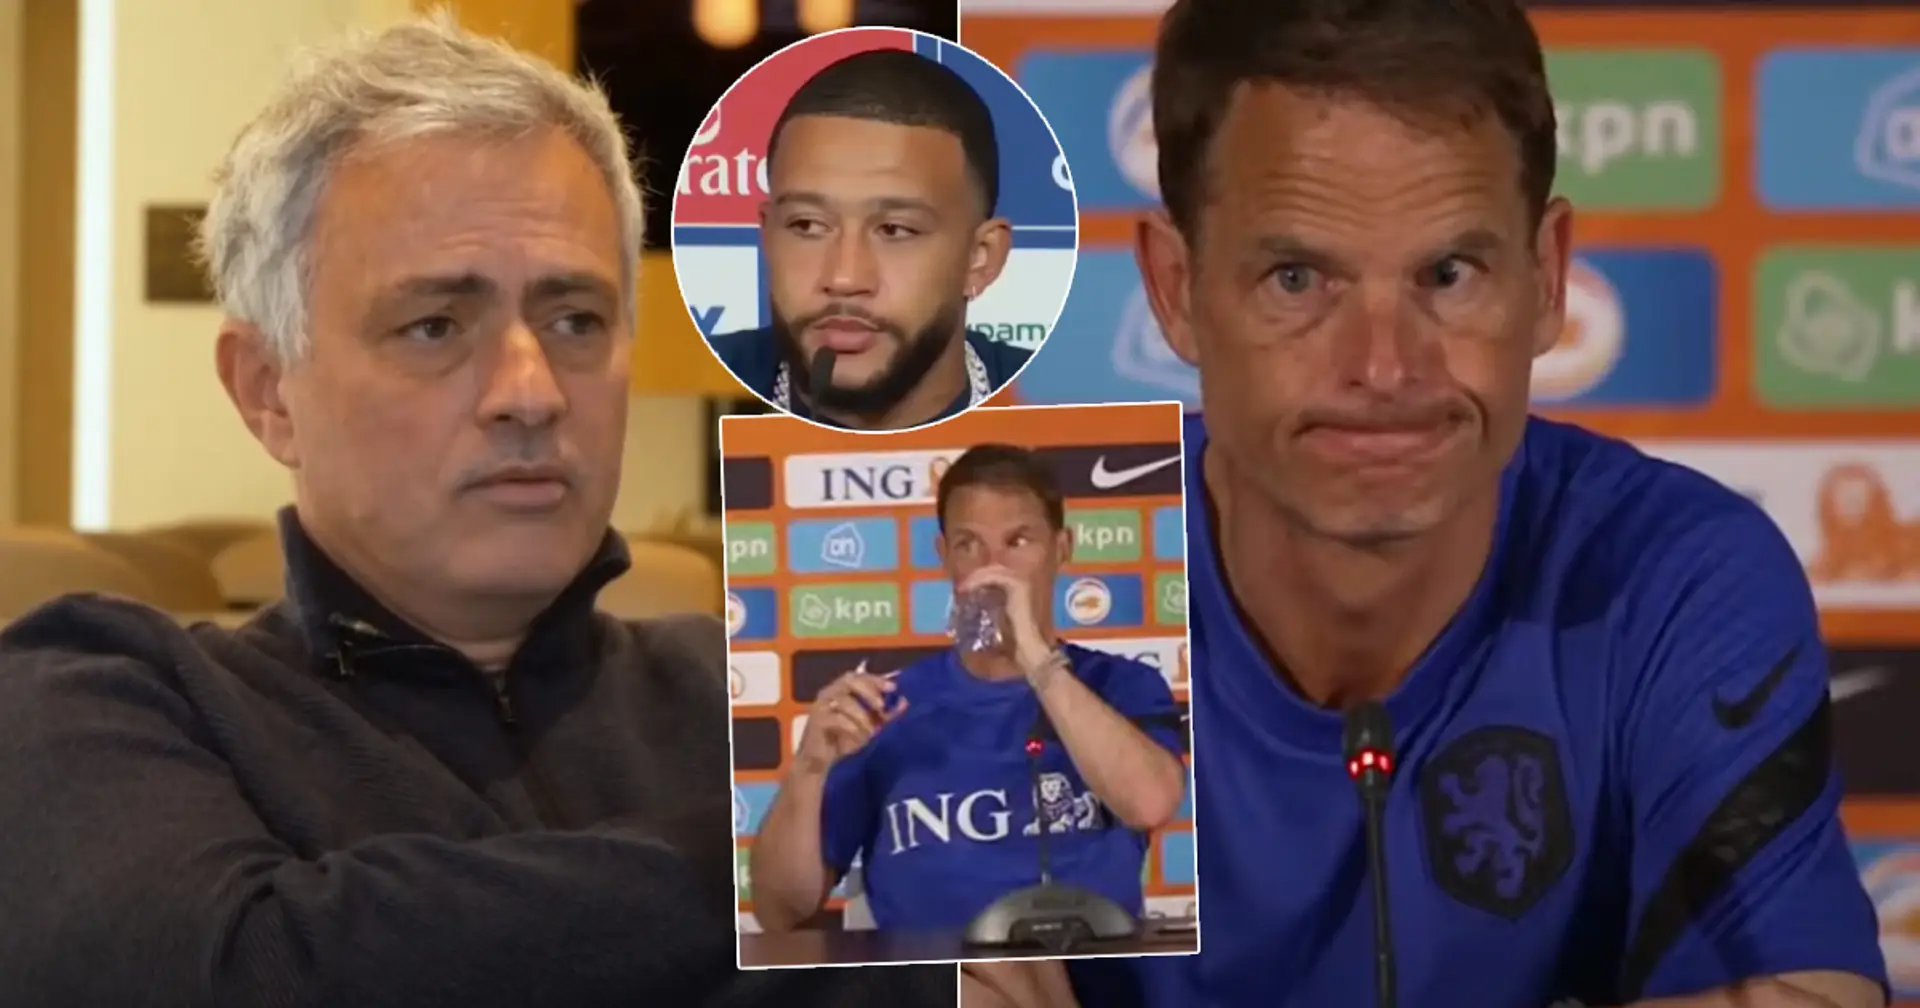 Mourinho: 'De Boer doesn’t have great experience as a national or club coach. I don't see Holland reaching semifinals at Euro 2020'